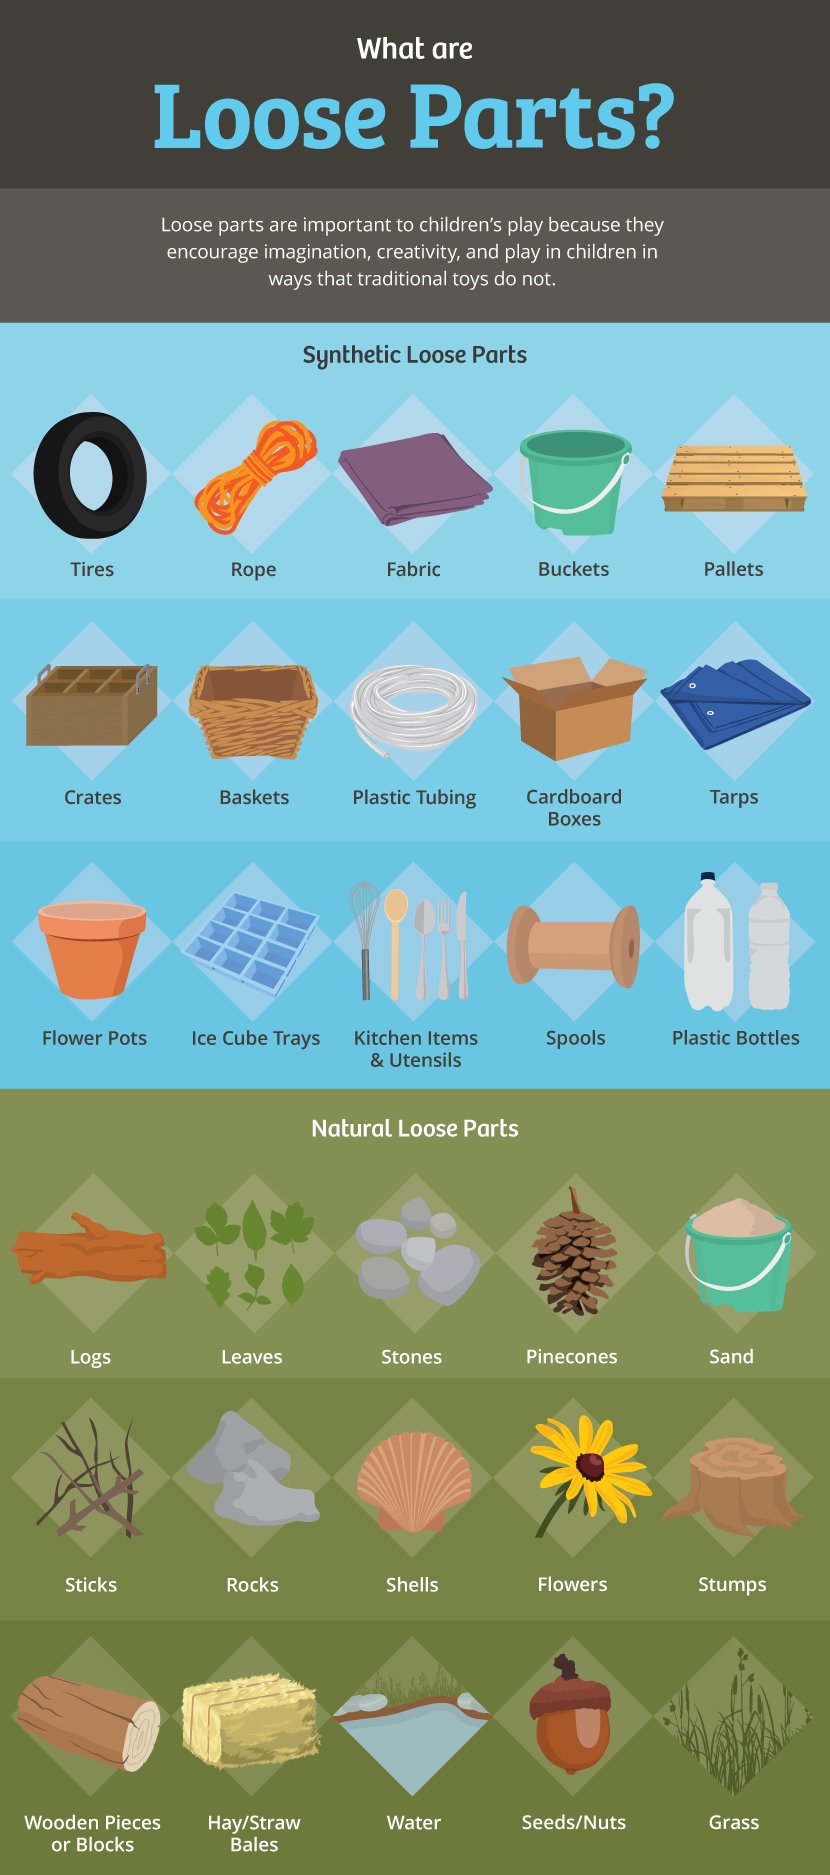 What Are Loose Parts - Bring Back Children’s Play